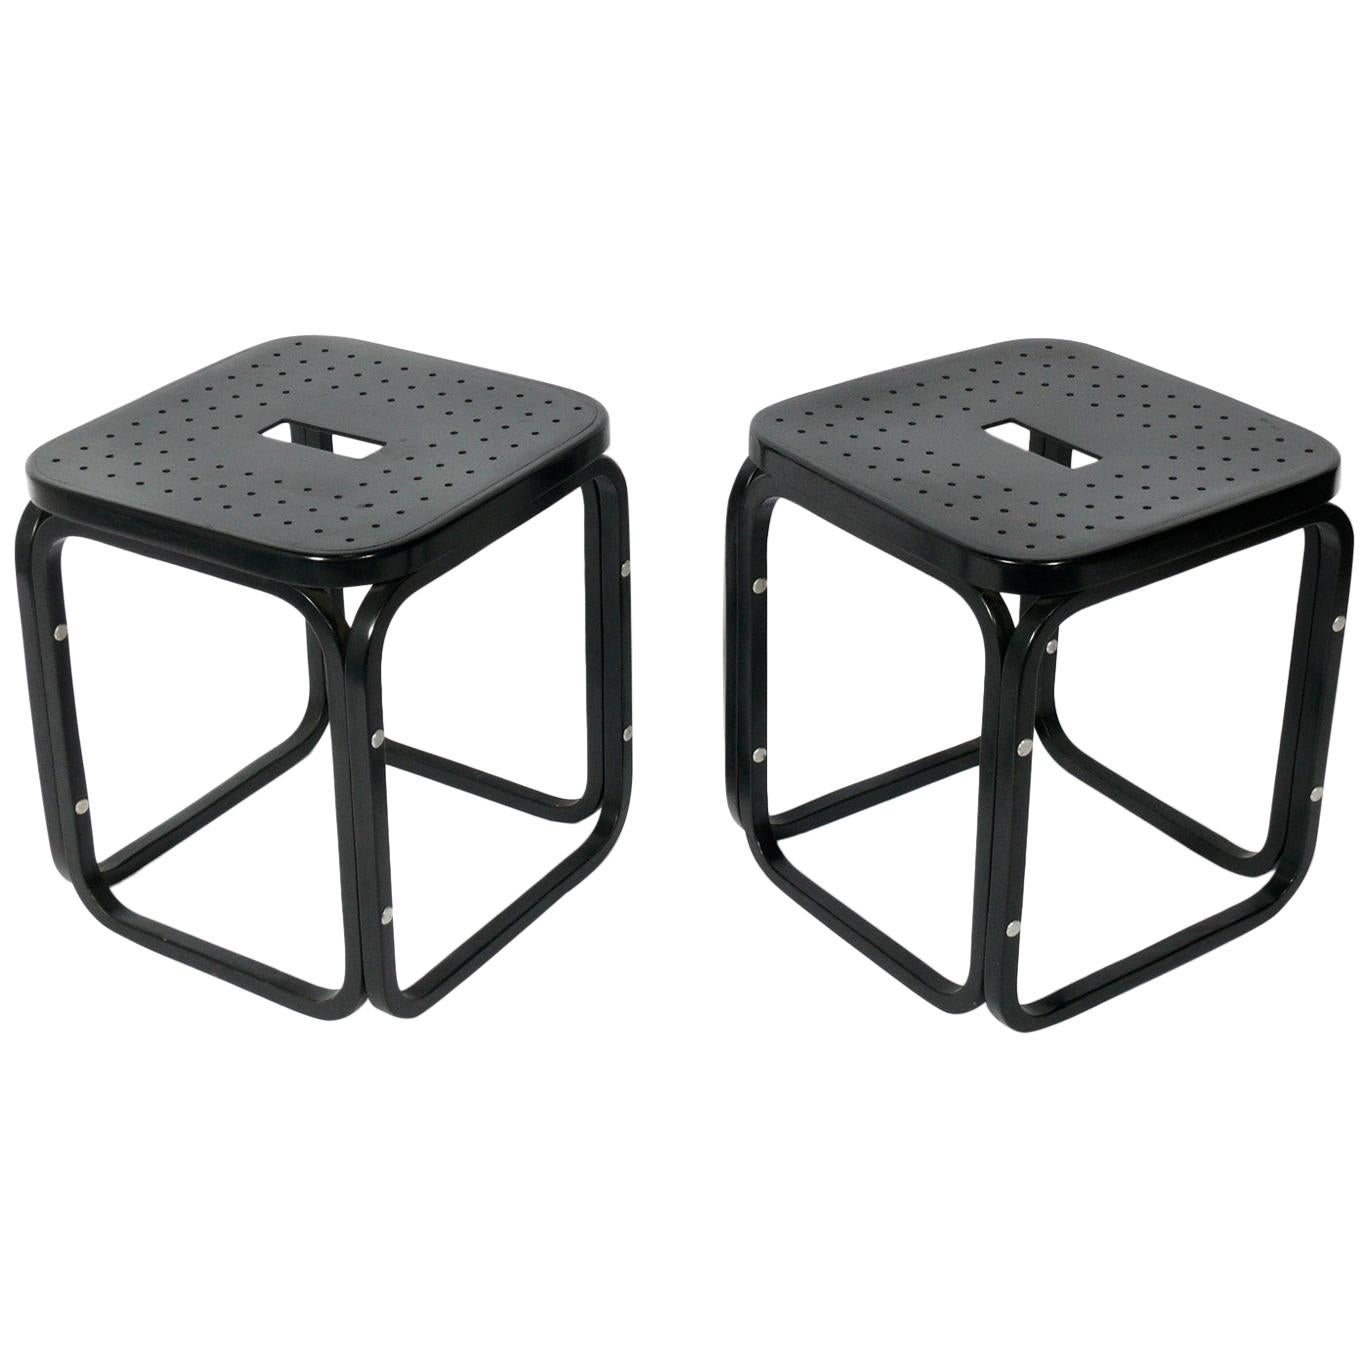 Otto Wagner Stools